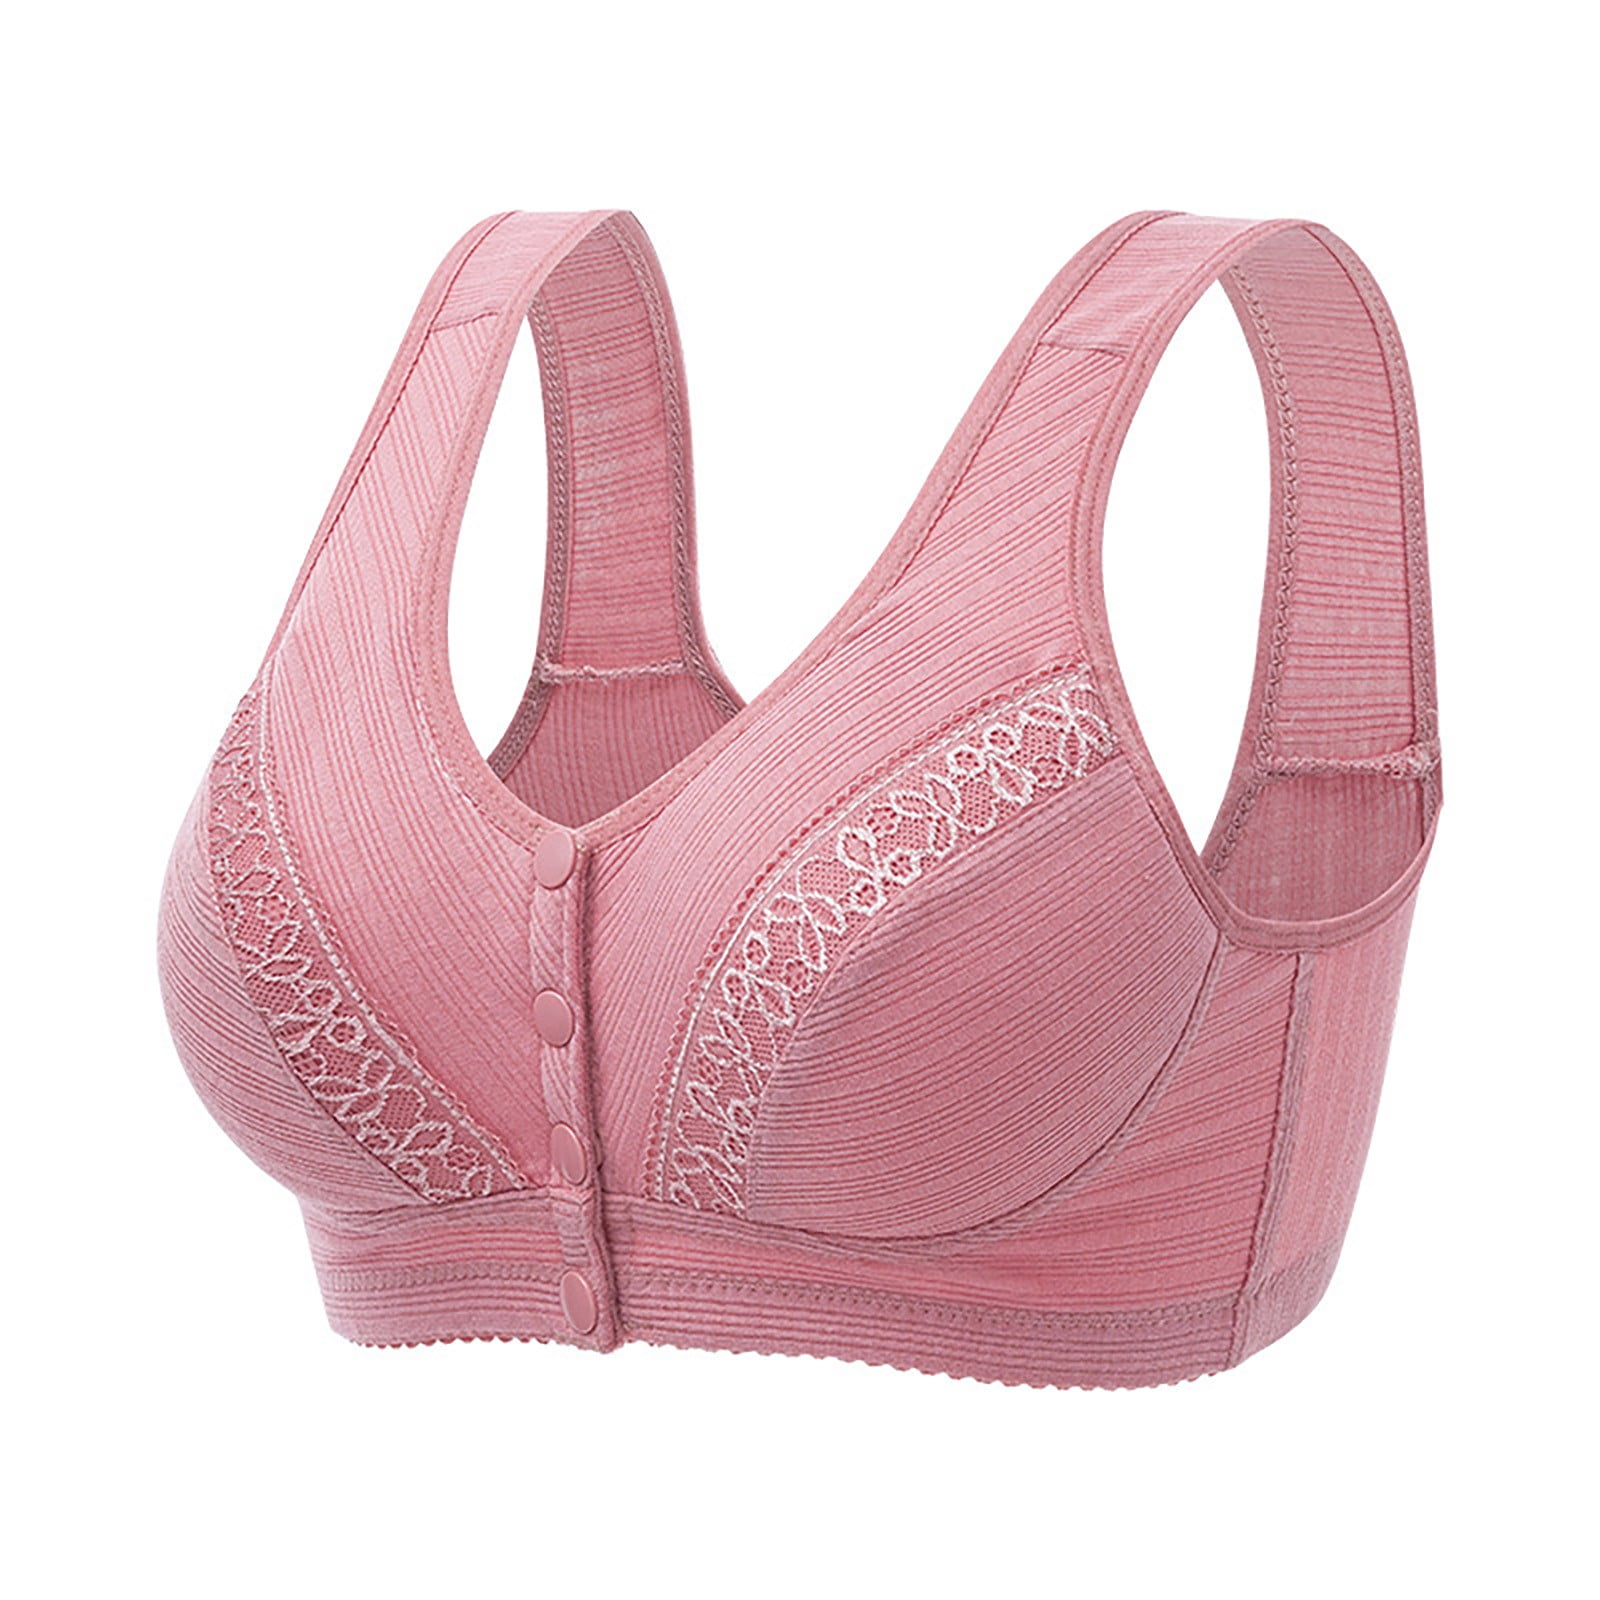 Pedort Strapless Bra For Big Busted Women Womens' Max Control Underwire  Sports Bra High Impact Plus Size with Adjustable Straps Pink,38